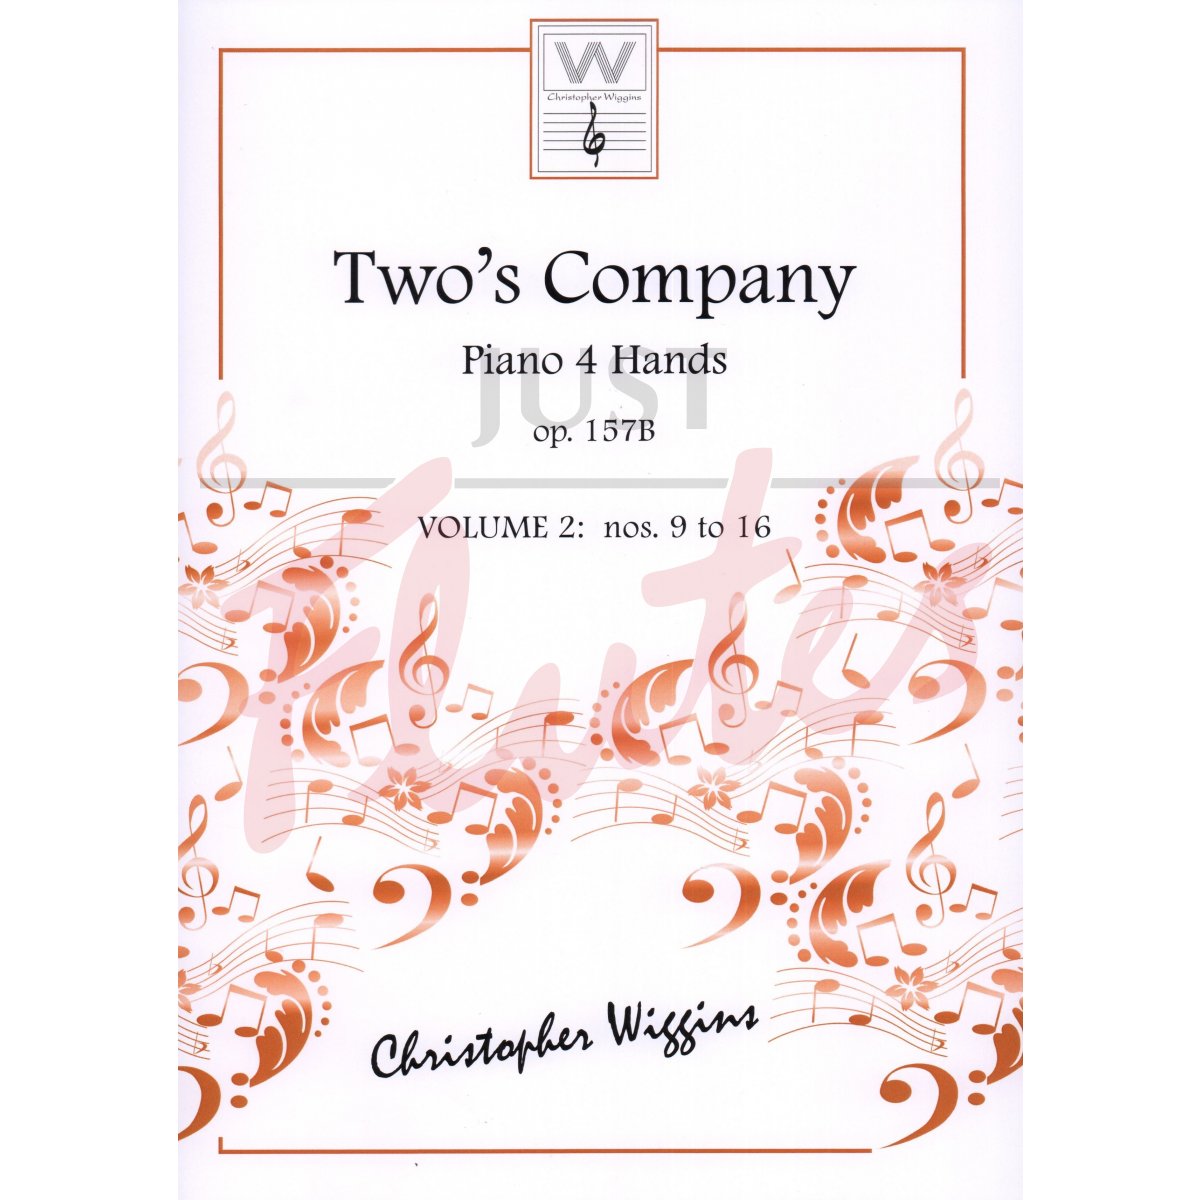 Two's Company for Piano 4 Hands, Volume 2